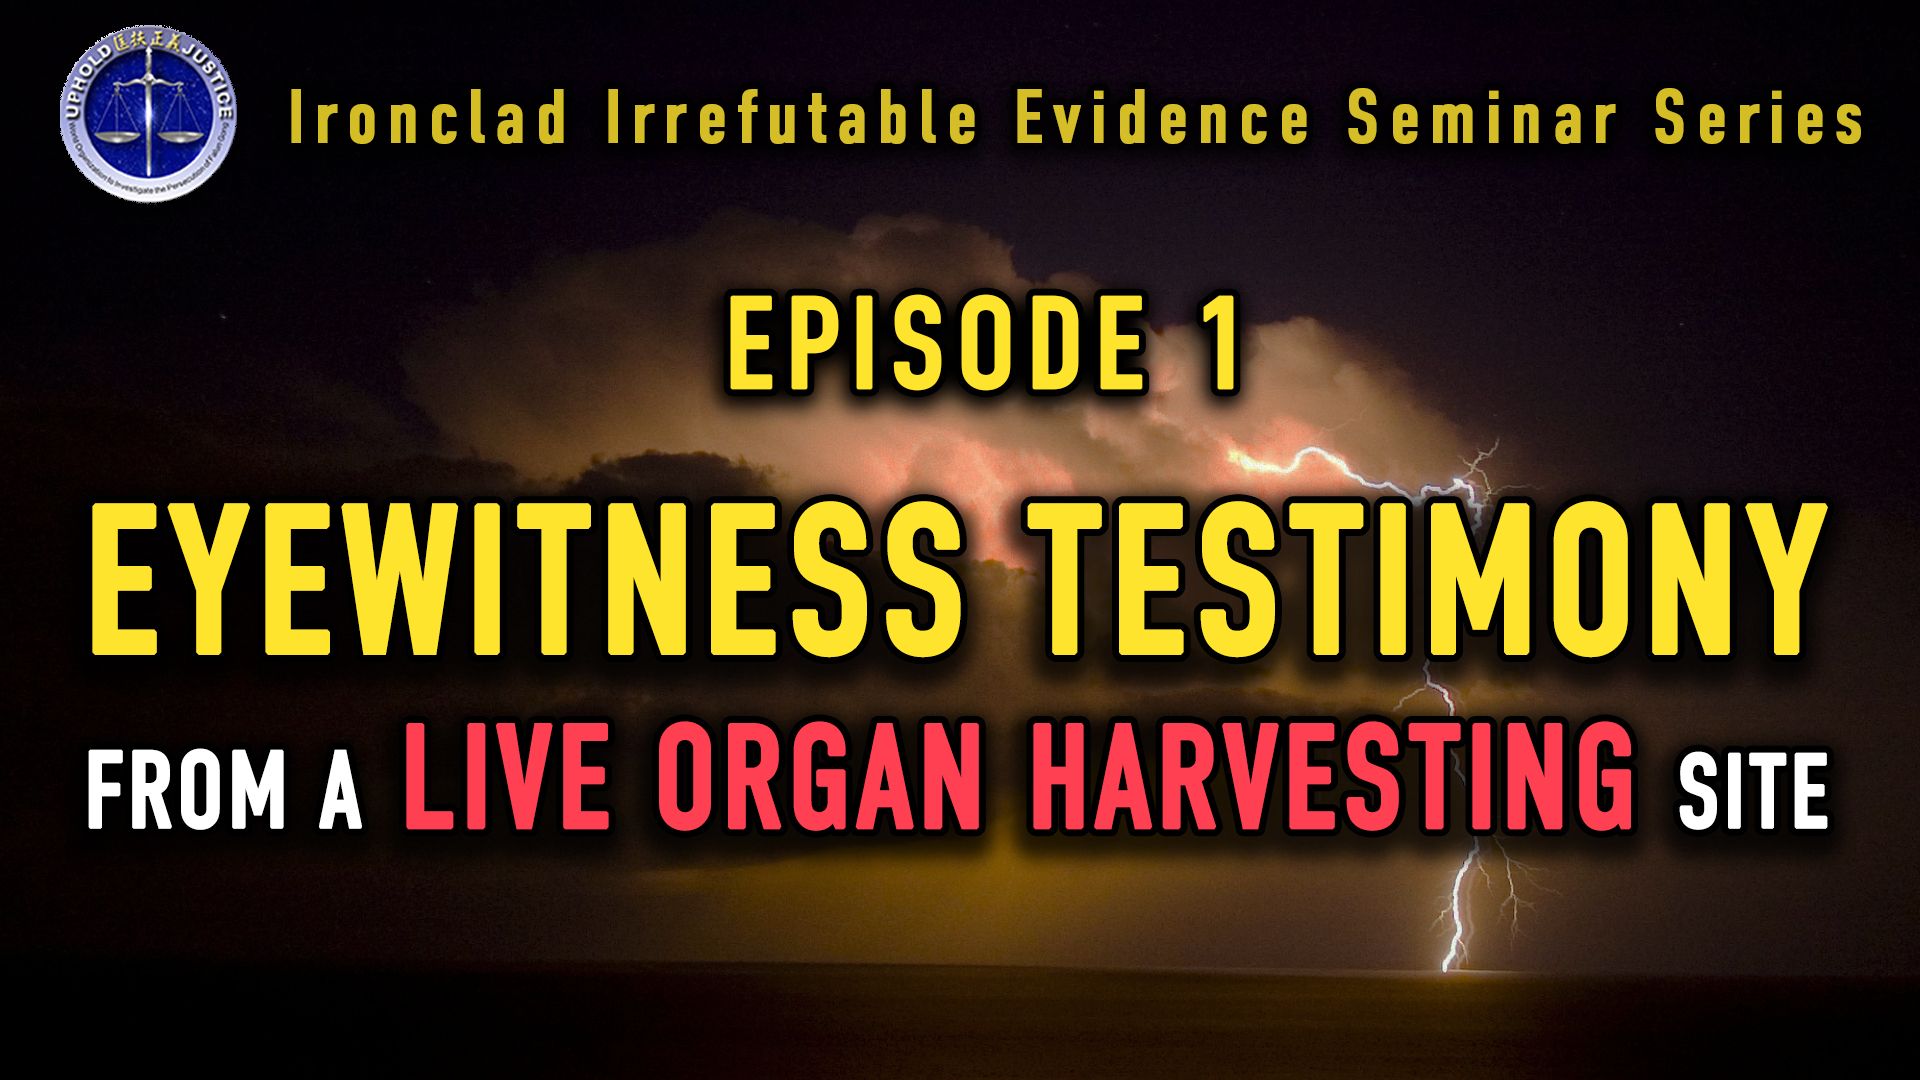 Episode 1 Eyewitness Testimony from a live organ harvesting site   